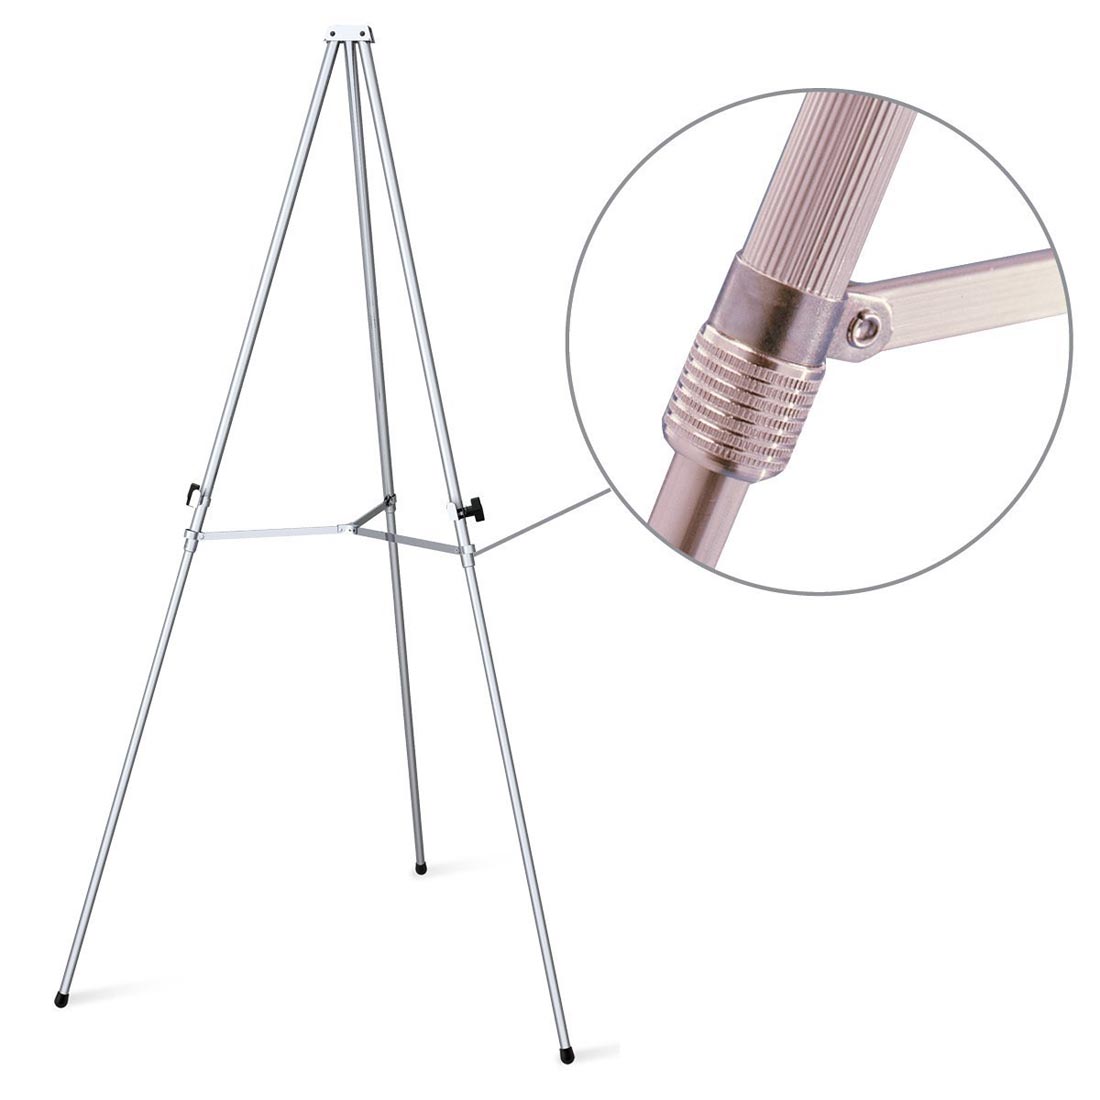 Stanrite Display & Sign Easel with a closeup inset picture of the telescoping leg